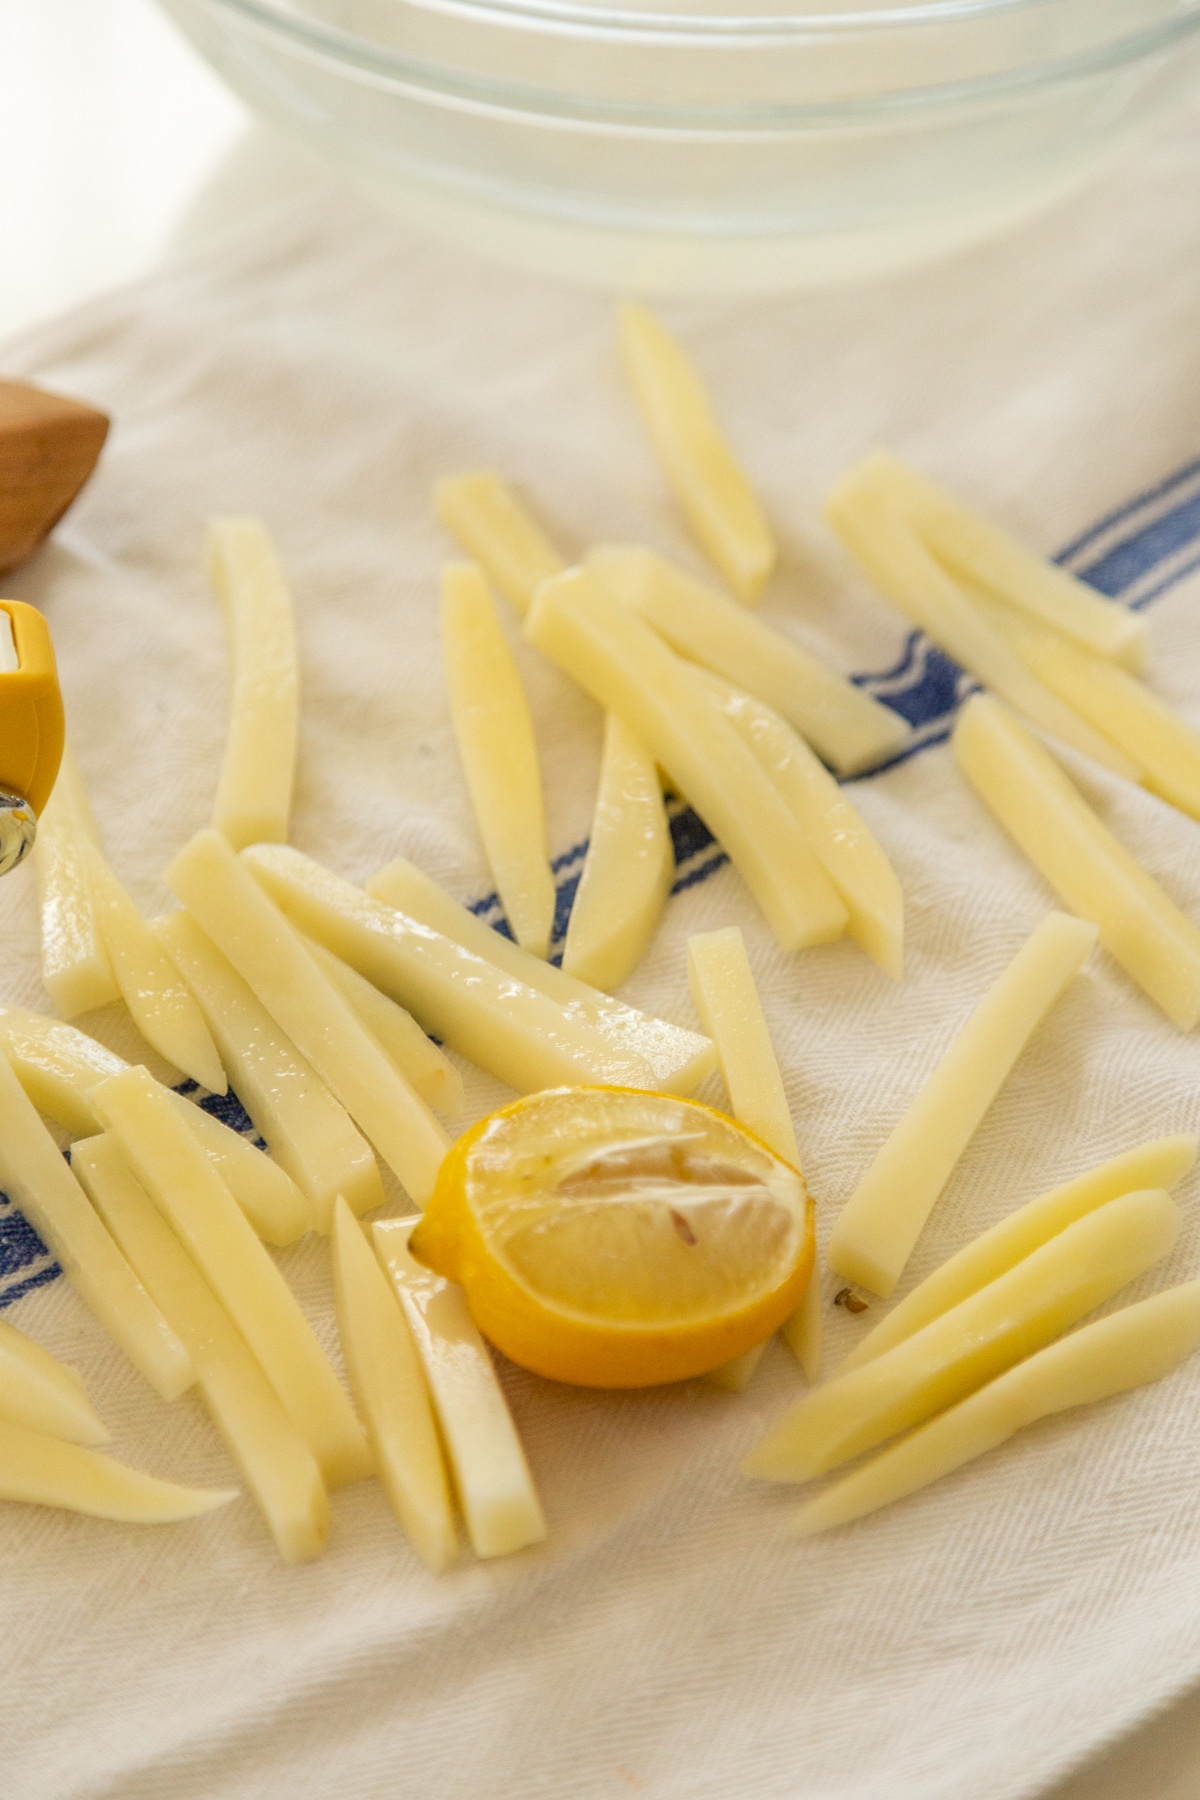 Uncooked french fries and a lemon wedge on a towel.